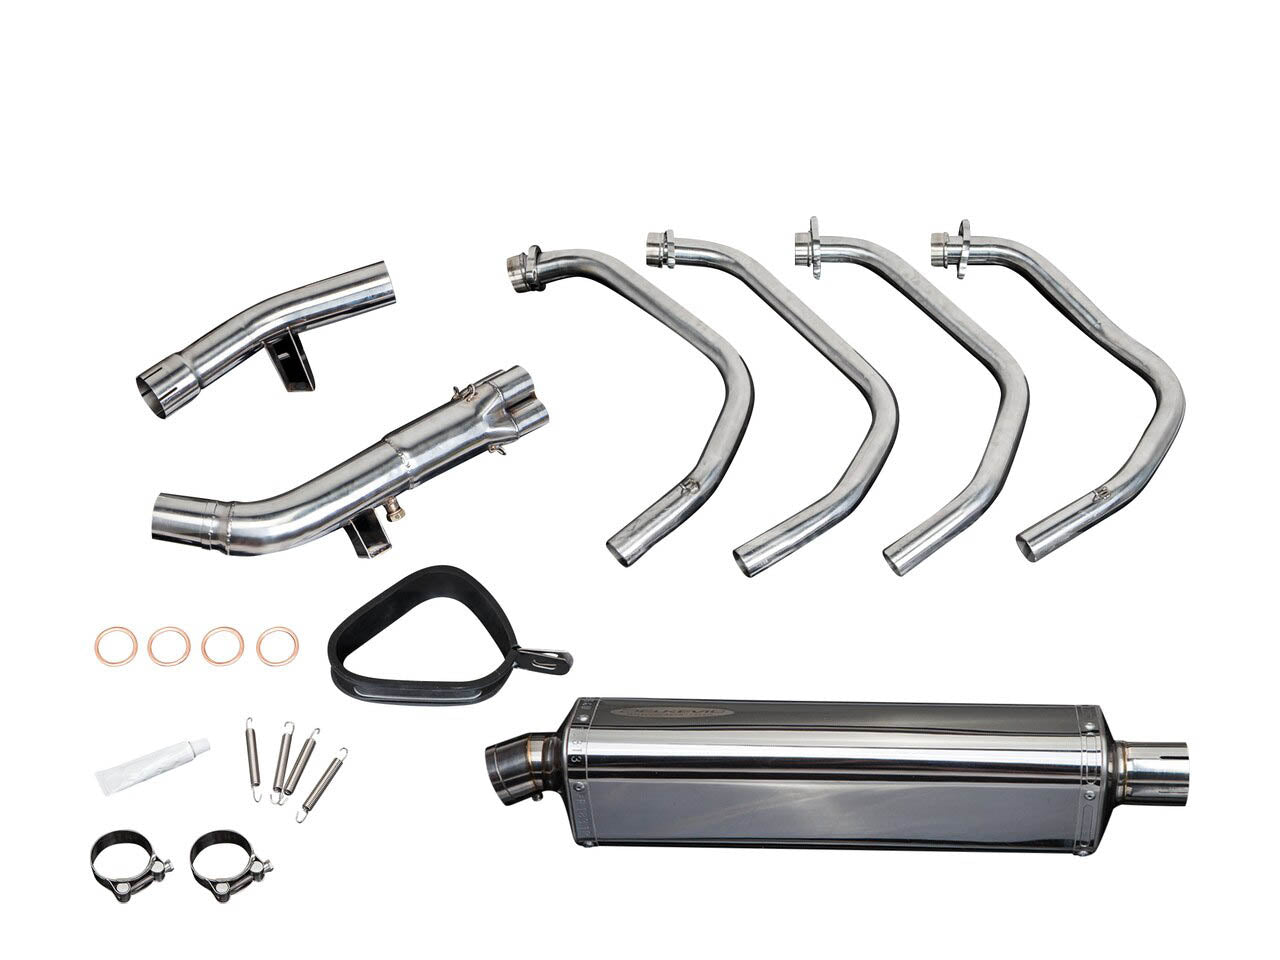 DELKEVIC Suzuki GSX1250FA Traveller Full Exhaust System with Stubby 17" Tri-Oval Silencer